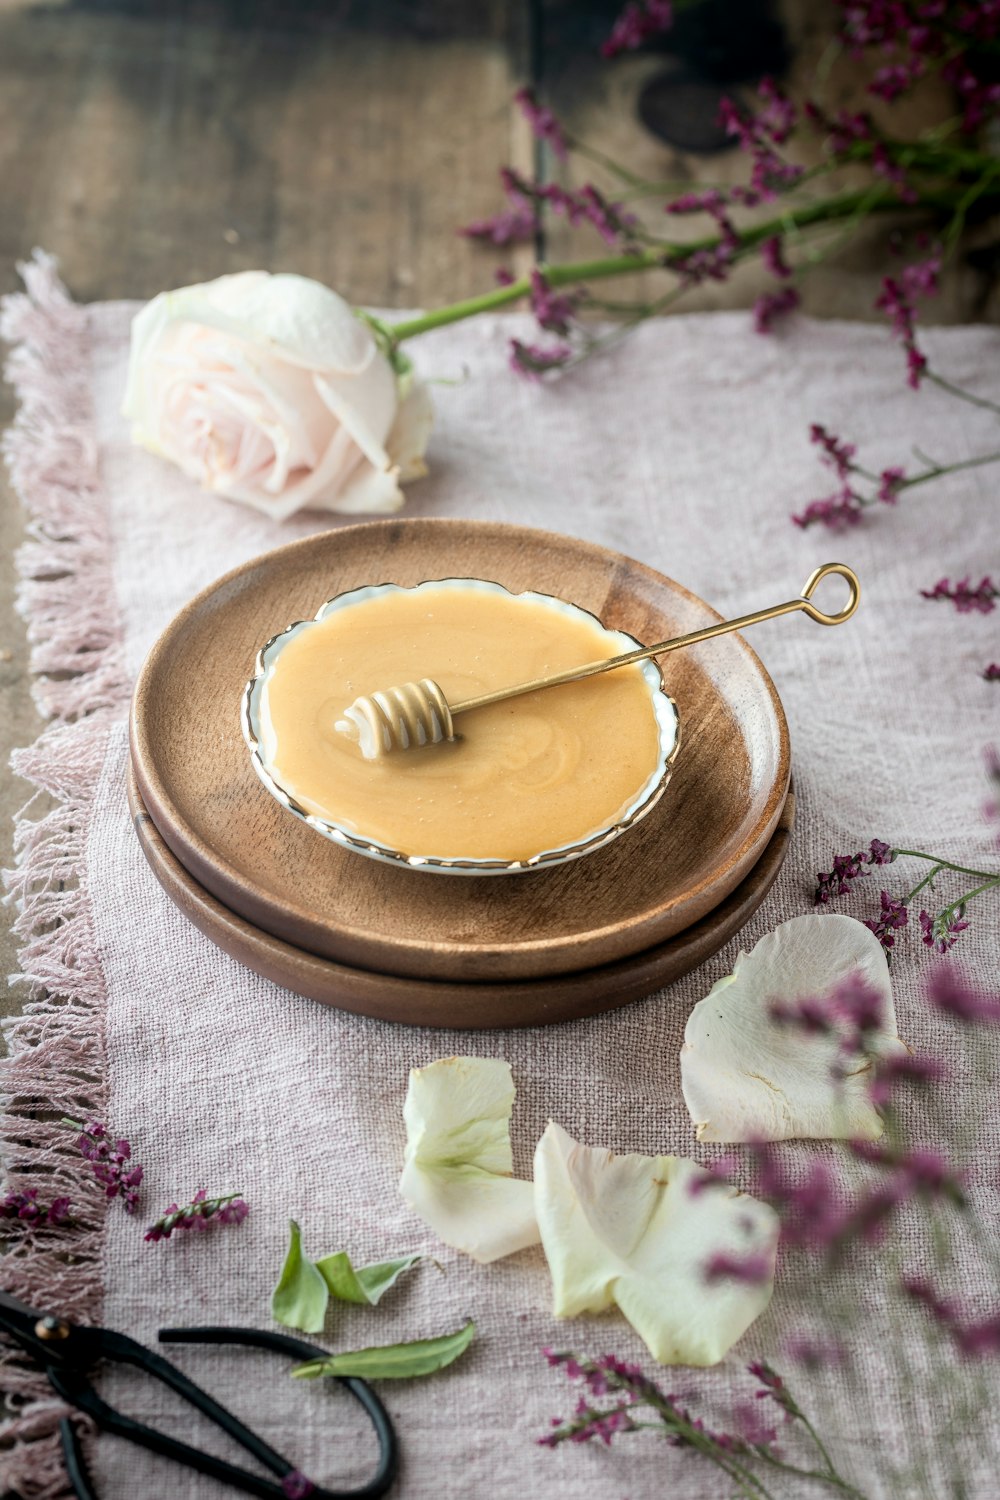 a wooden plate with a honey dip on it